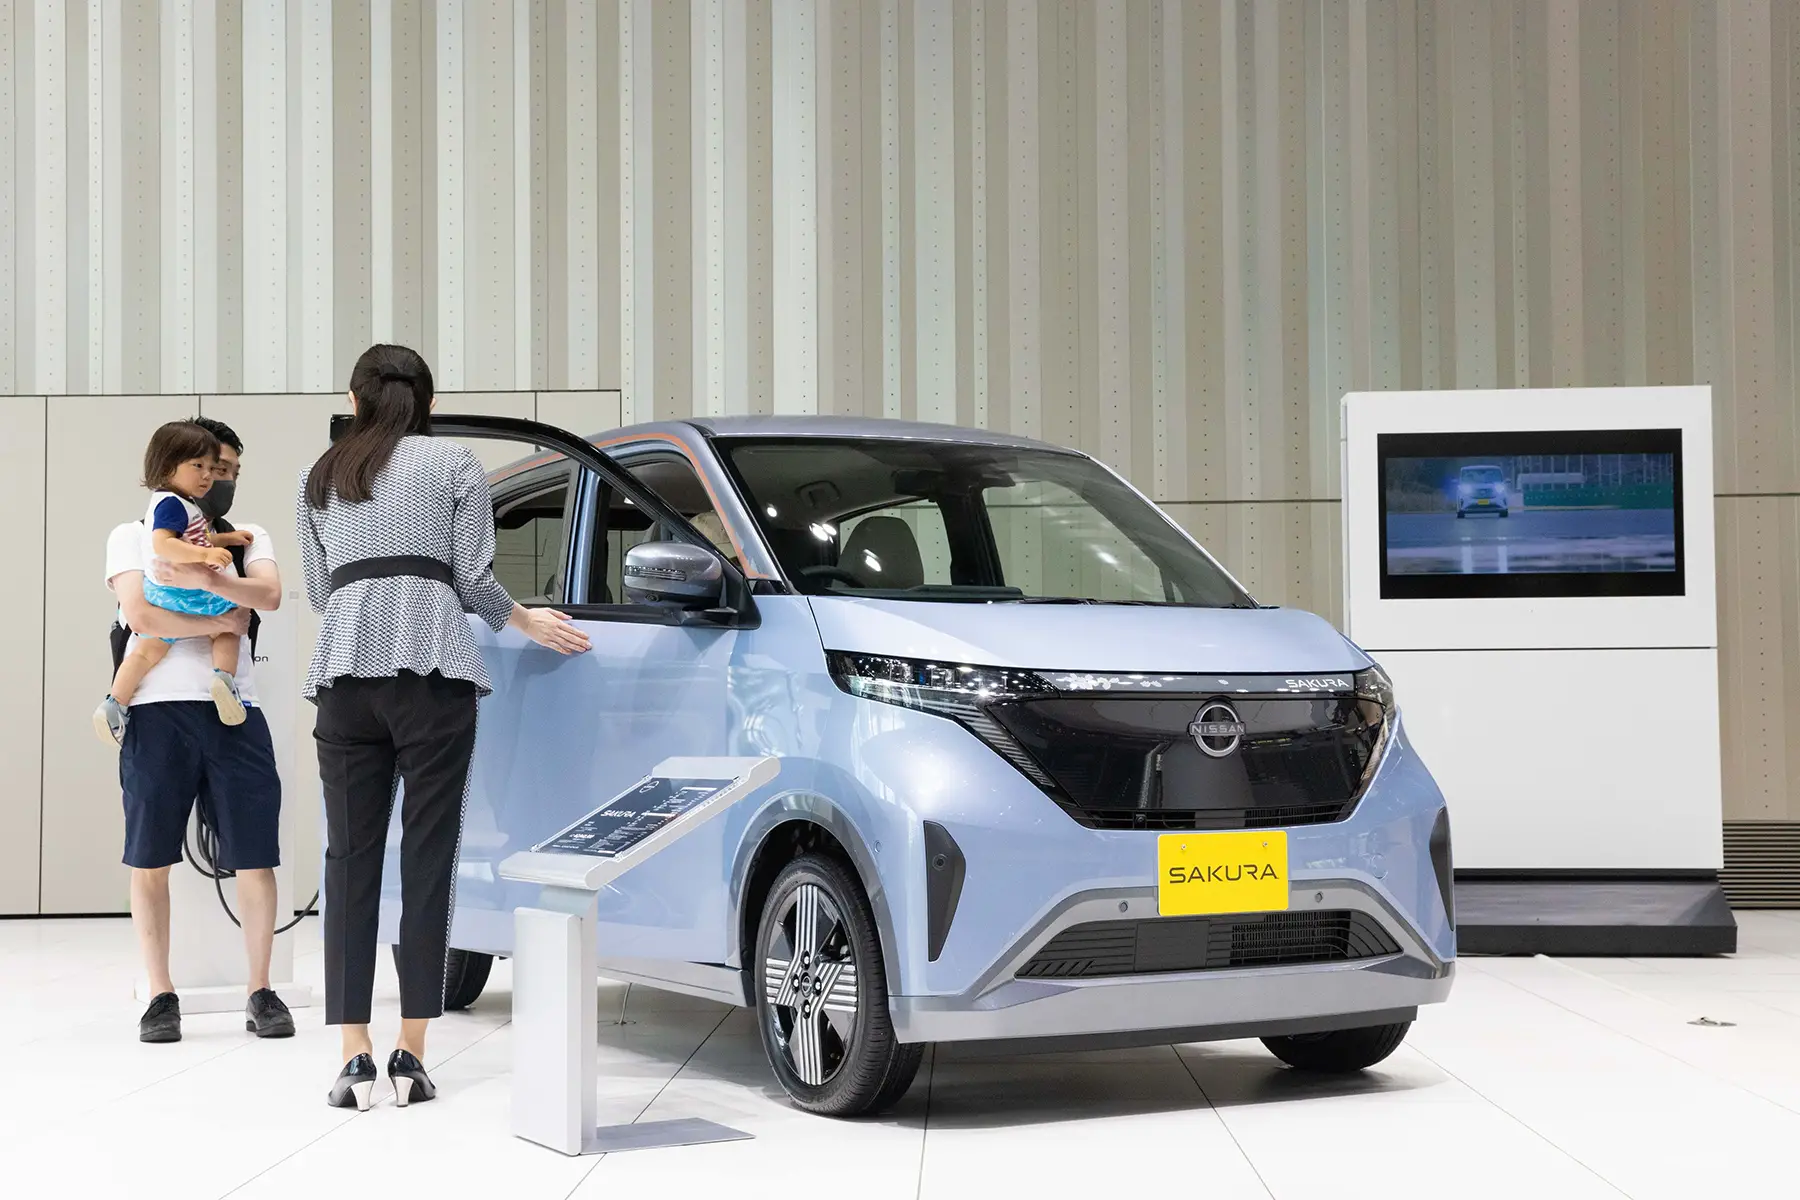 A salesperson shows a new Nissan Sakura to a child and its parent. The car is boxy and light blue.